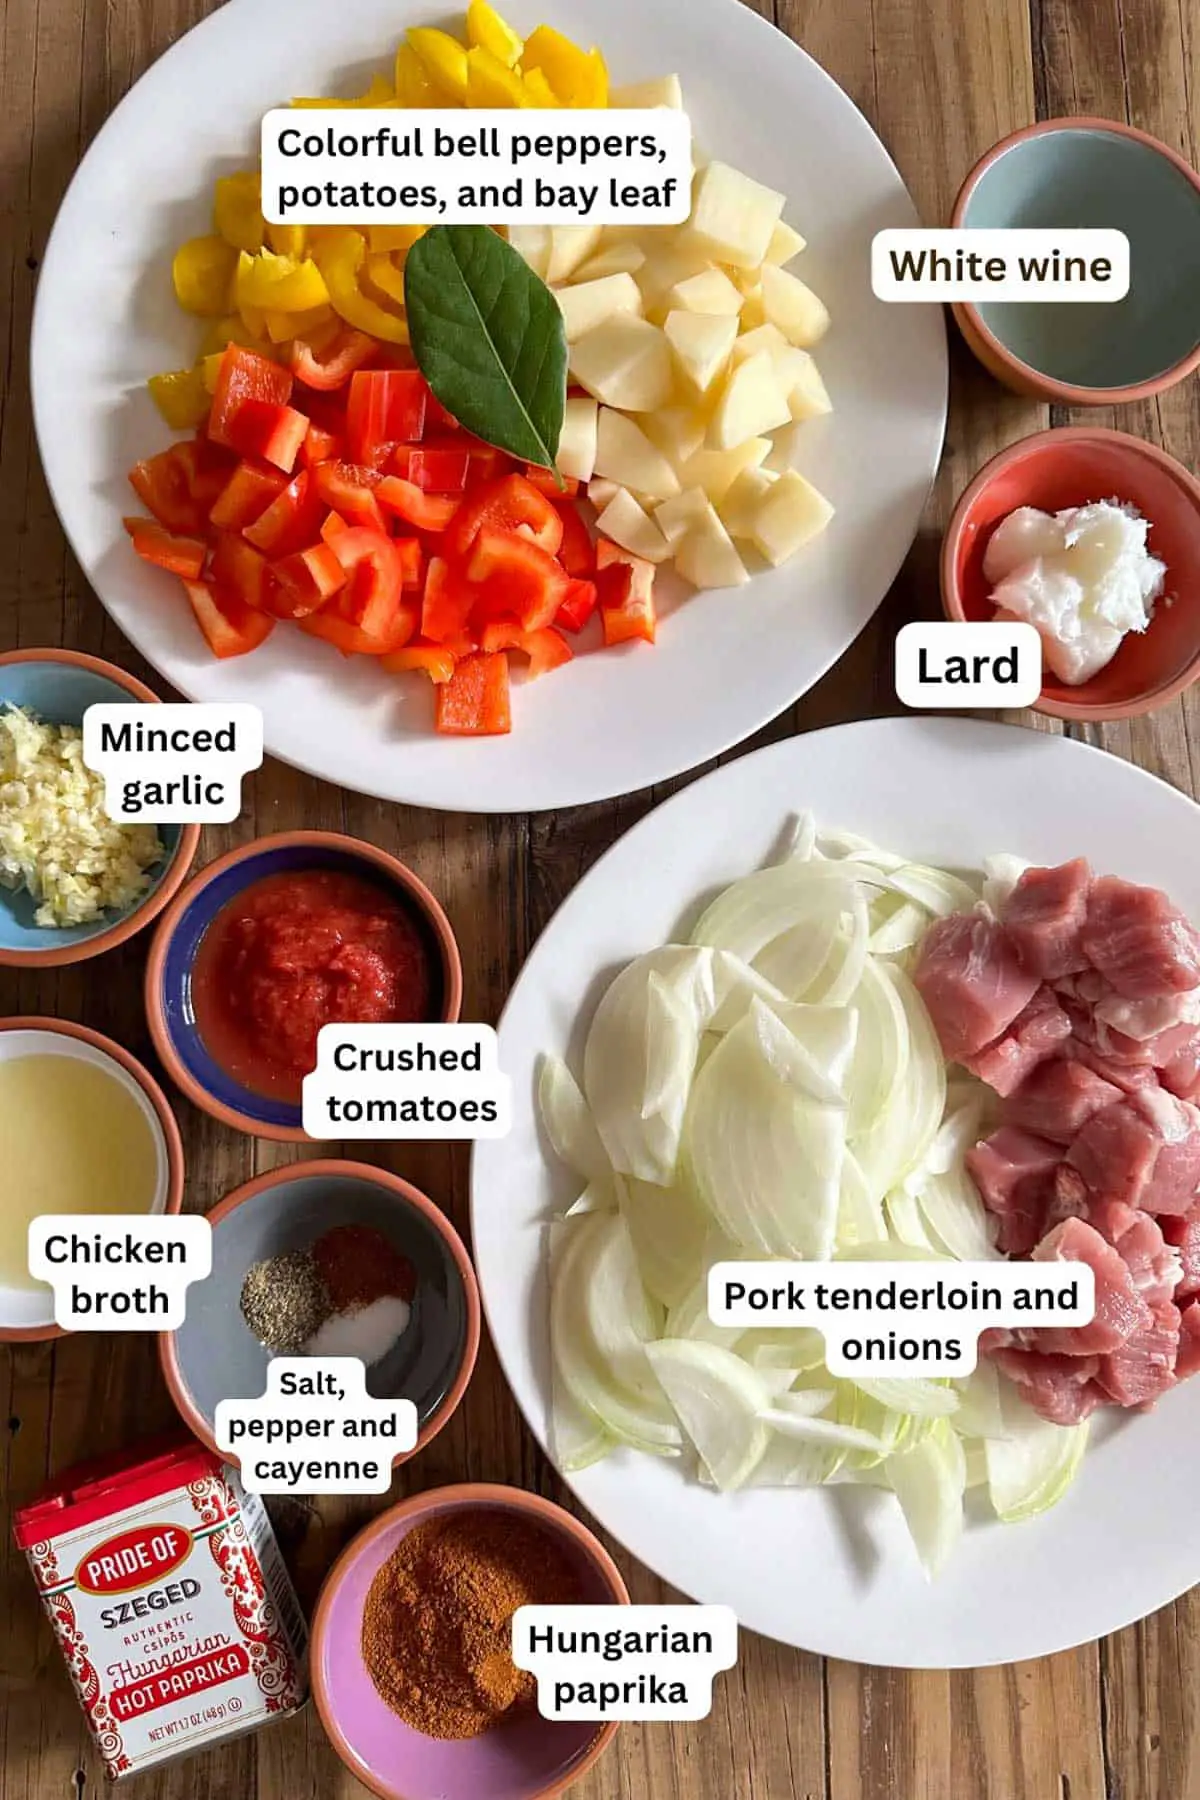 Ingredients for Hungarian pork goulash displayed on plates and bowls including: bell peppers, potatoes, bay leaf, white wine, lard, minced garlic, crushed tomatoes, chicken broth, seasonings, paprika, pork tenderloin, sliced onions, and a container of Hungarian paprika.